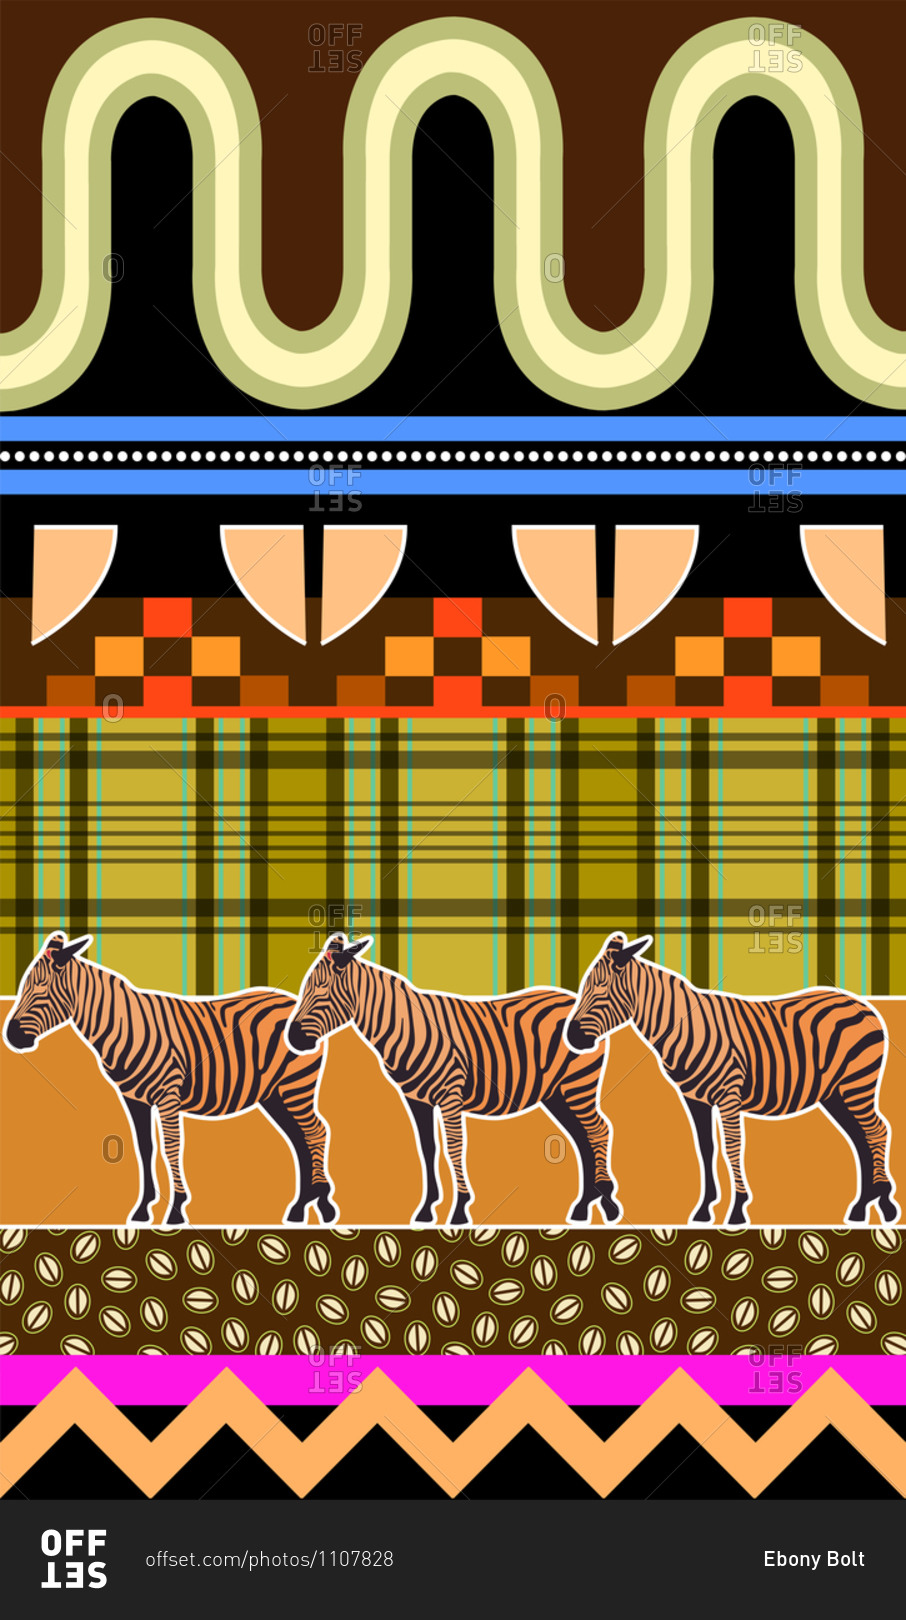 Digitally created illustration of three zebras with
geometric shapes in the background stock photo - OFFSET